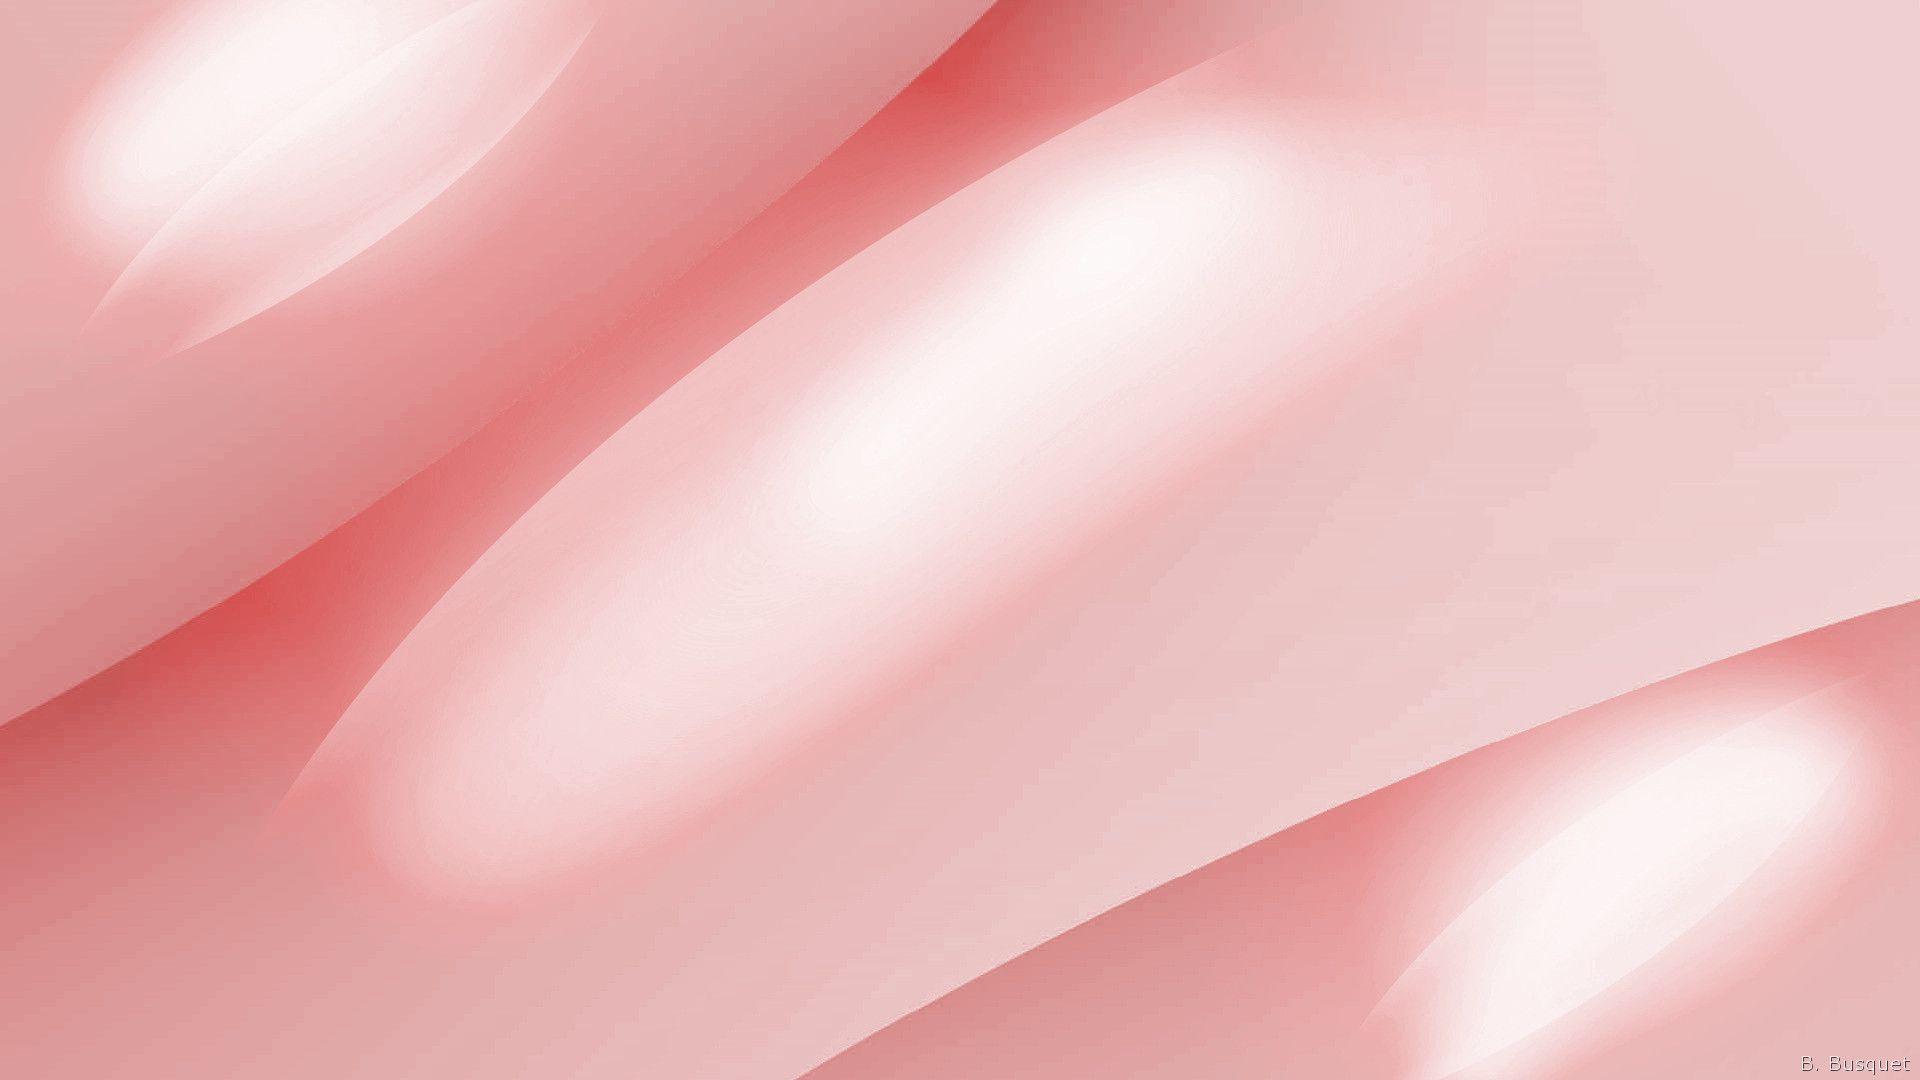 Soft Pink Backgrounds - Wallpaper Cave